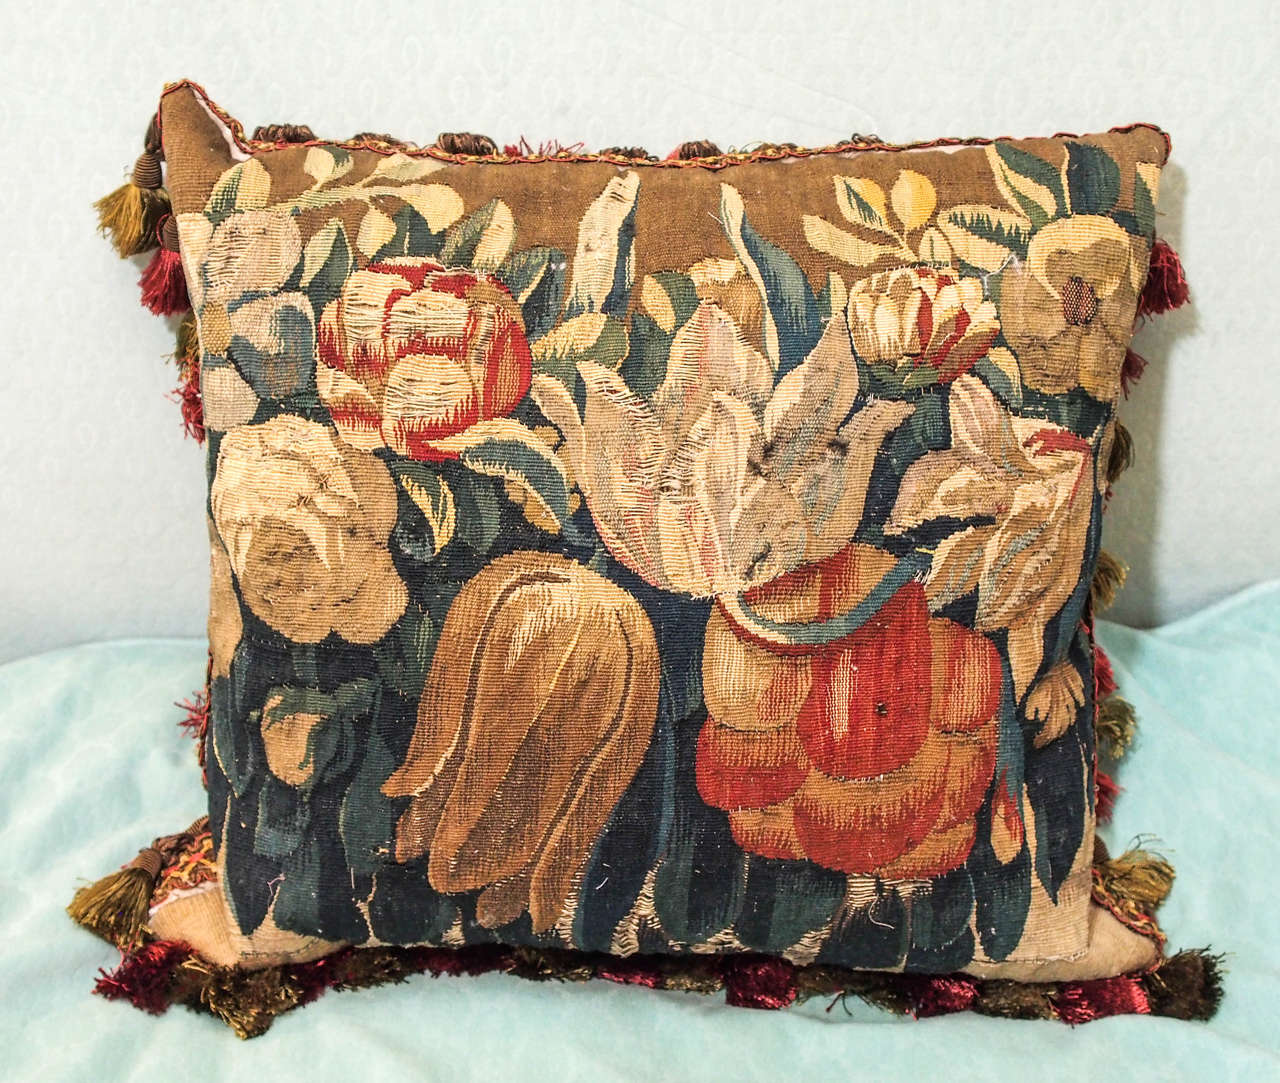 17th century Aubusson tapestry fragment depicting tulips now as cushion with silk velvet backing, trim and down inserts.